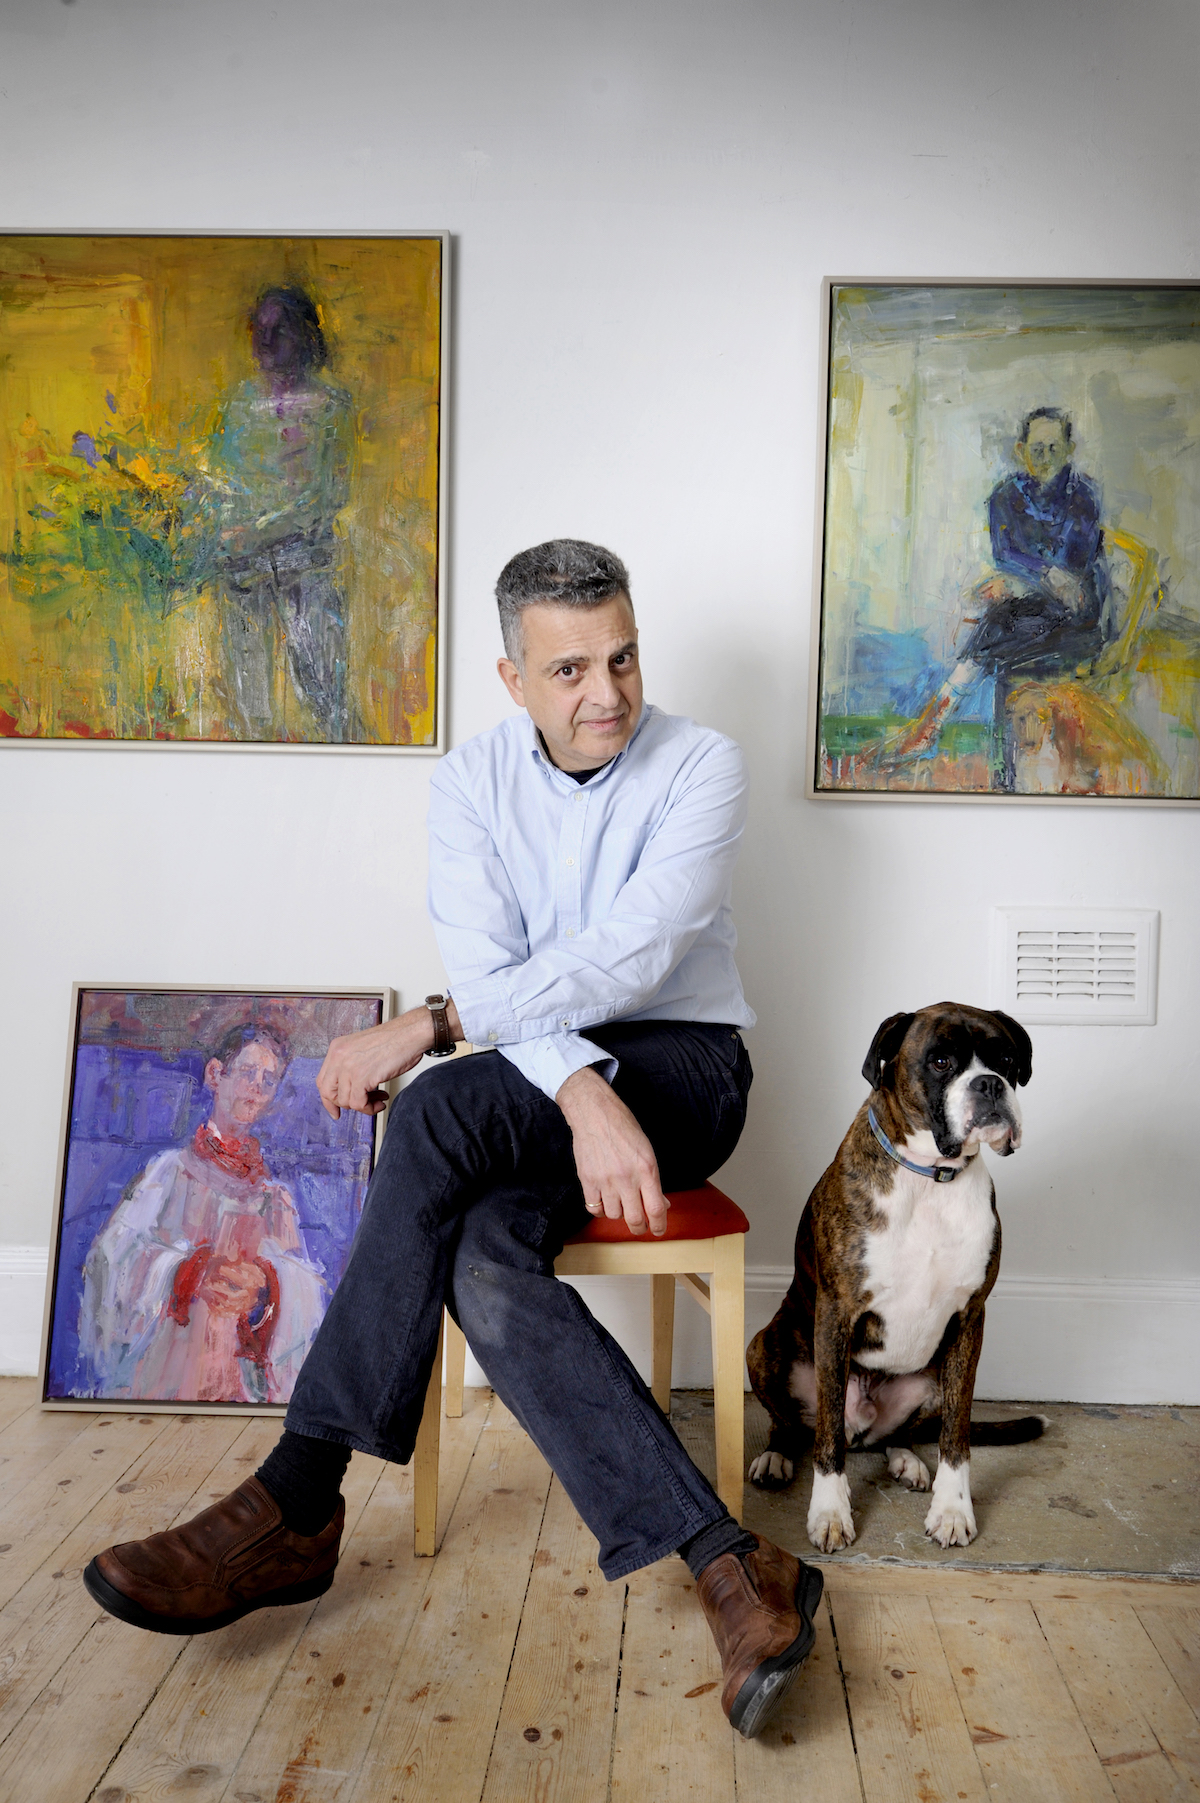 FREE PICTURE: Artist Henry Jabber Exhibition at Union Gallery, Edinburgh, 03/03/2017: Artist Henry Jabbour (correct) at his Union Gallery exhibition of paintings, Edinburgh. Pictured with Dennis the galery mascot / dog, and Henry's paintings including "Seated Man With Dog" (top right). Henry left a successful career as a research scientist to train as a painter is to have his first solo exhibition, opening in Edinburgh’s Union Gallery on Saturday (4th March 2017, and until 1st April 2017). Henry Jabbour, who worked for nearly 20 years based at the Medical School at Edinburgh University, left his job in medical research to train as an artist. Henry, who was born in Lebanon, worked for the Medical Research Council in Edinburgh before quitting to paint full-time in 2010. He said: “For many years, I was working as a scientist and painting every moment I could in my spare time. Bit by bit, my passion for art outgrew my passion for the science. More information from: Susan Mansfield - PR consultant for the Union Gallery - 07803 620 038 - wordsmansfield@gmail.com Photography for Union Gallery from: Colin Hattersley Photography - www.colinhattersley.com - cphattersley@gmail.com - 07974 957 388. Free FIRST USE (ONLY) picture. Photography from: Colin Hattersley Photography - colinhattersley@btinternet.com - www.colinhattersley.com - 07974 957 388